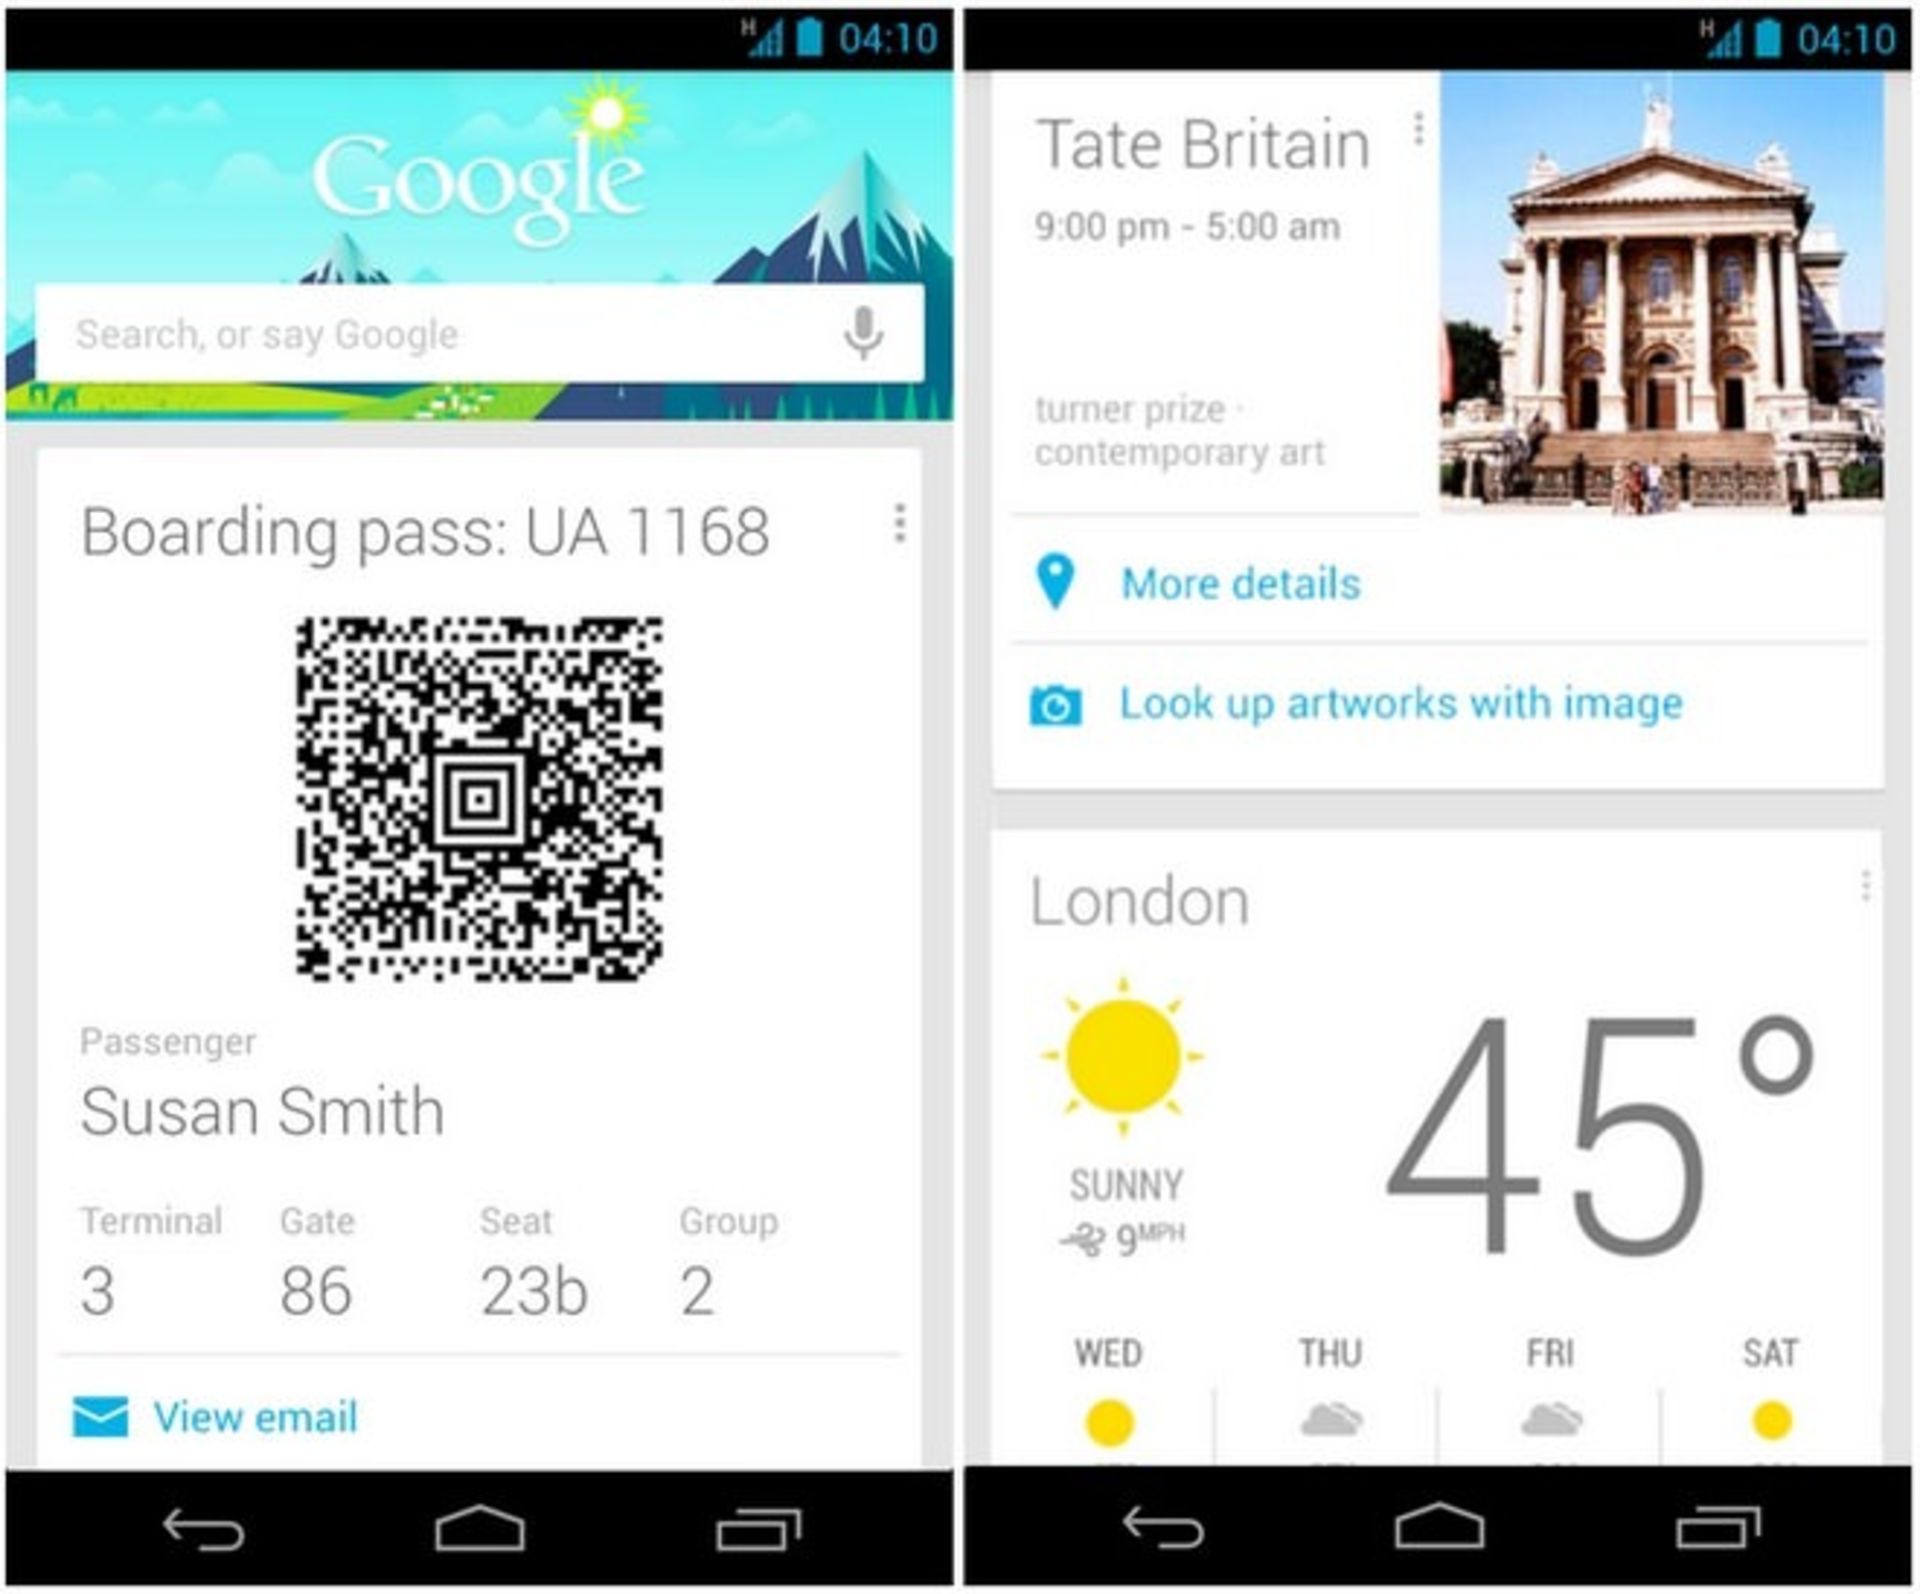 Google-Now-Update-Dec12-Android-Travel